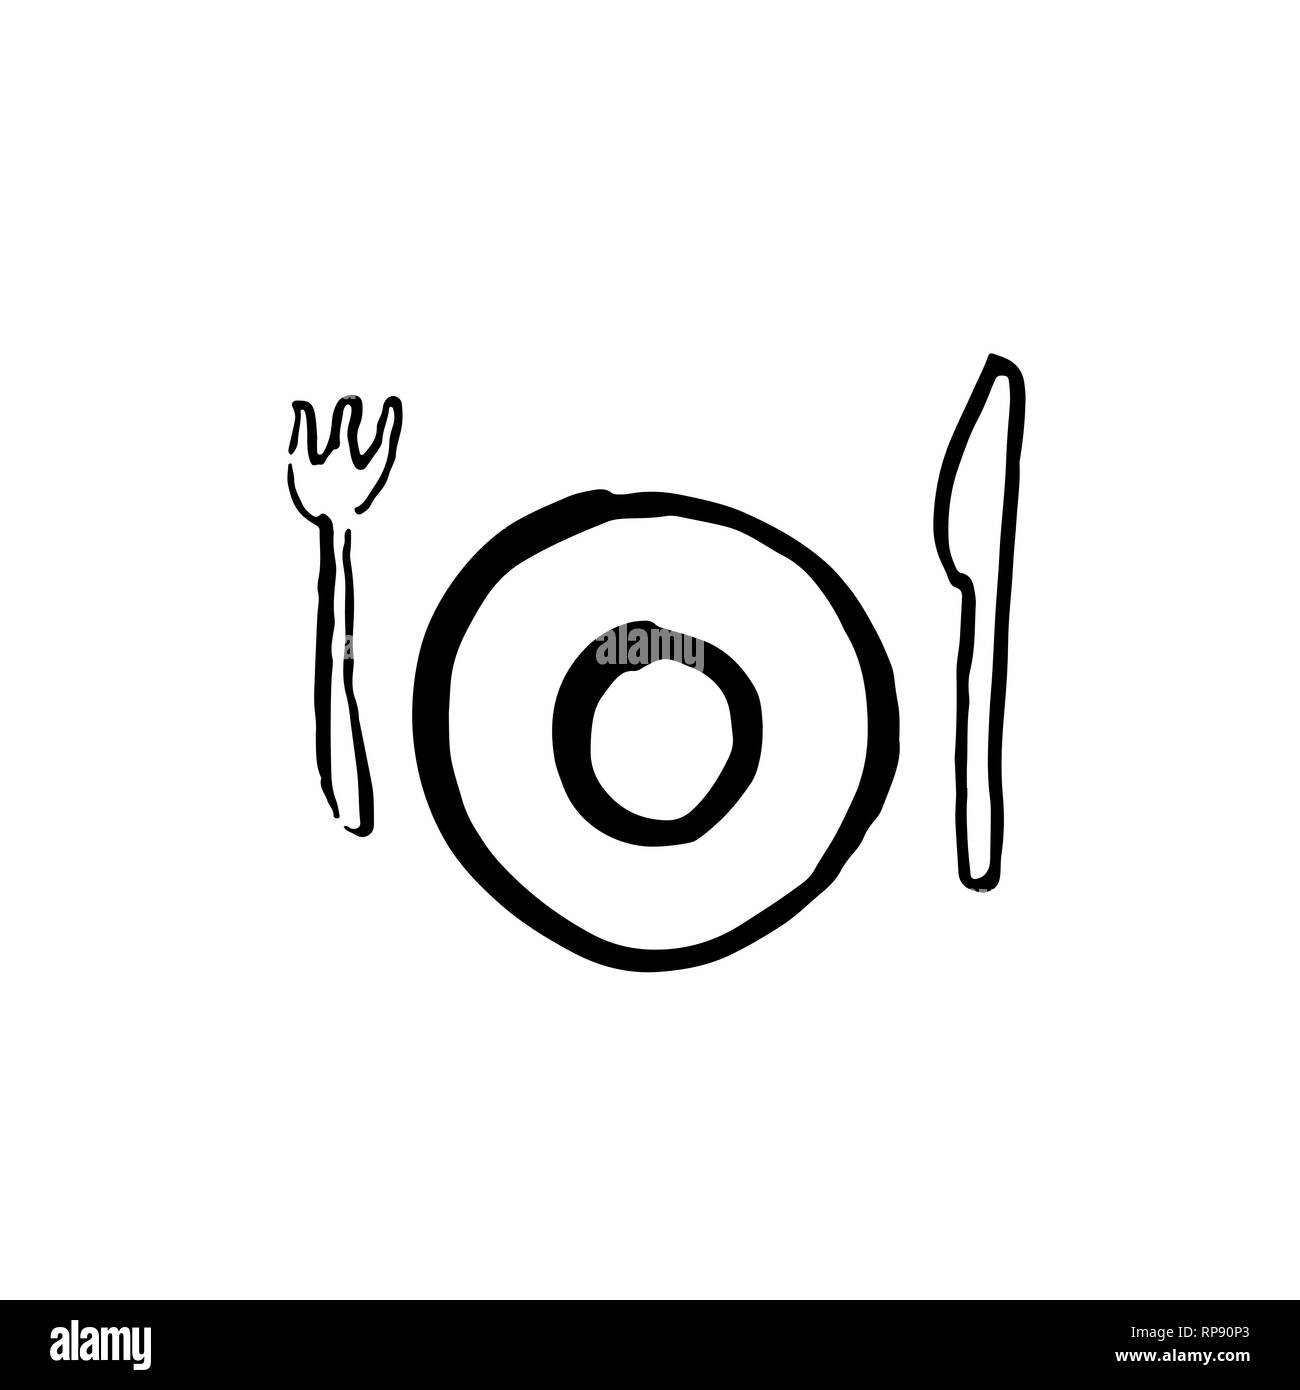 Plate, fork and knife grunge icon. Hand drawn brush vector illustration. Stock Vector